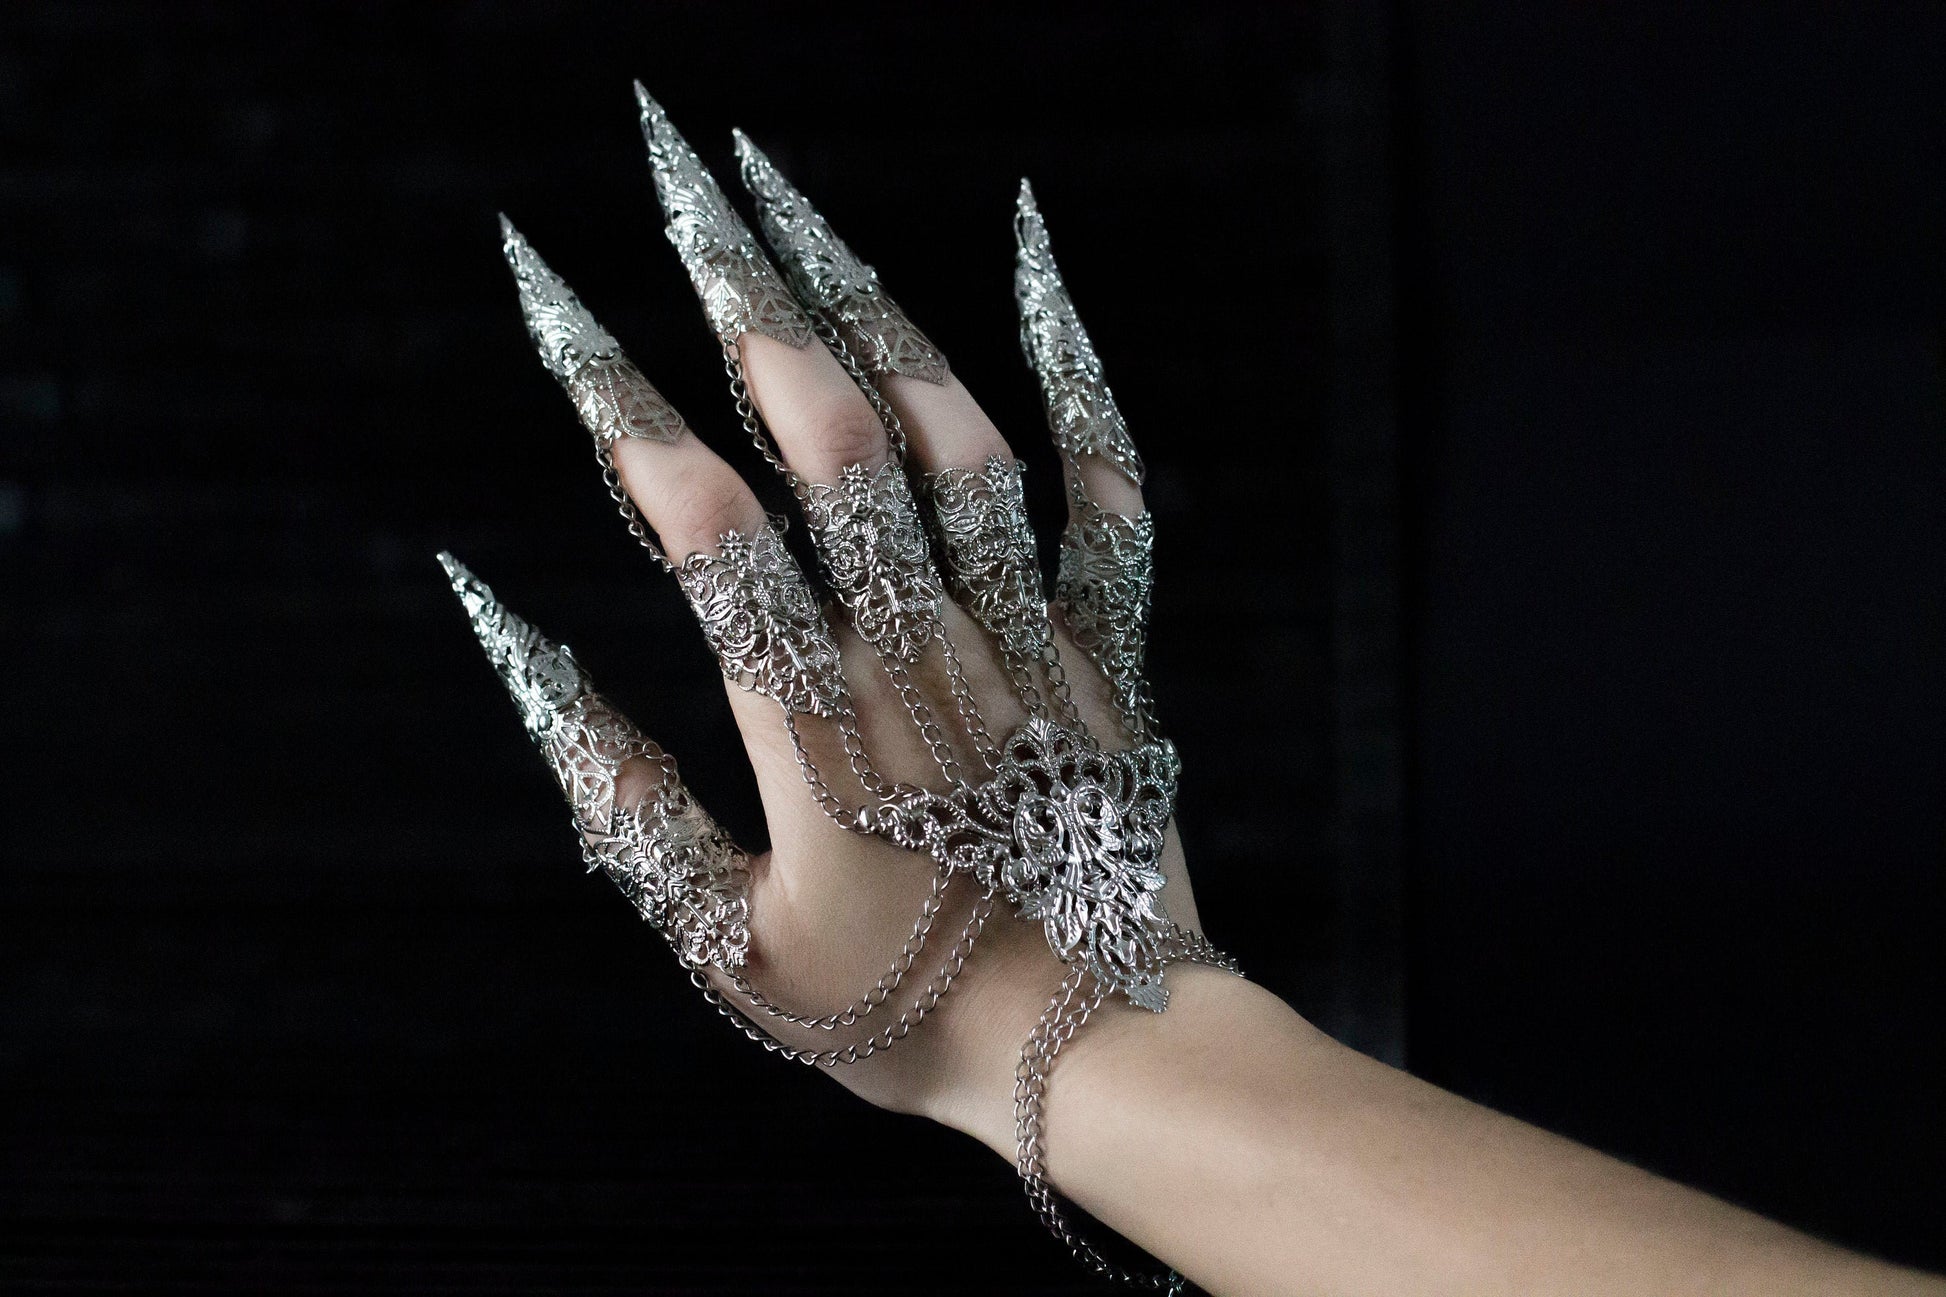 A hand adorned with an intricate silver Metal Glove Diablo, featuring detailed filigree work and sharp, elongated fingertip designs, connected by delicate chains that add a gothic elegance to the piece, set against a dark background.